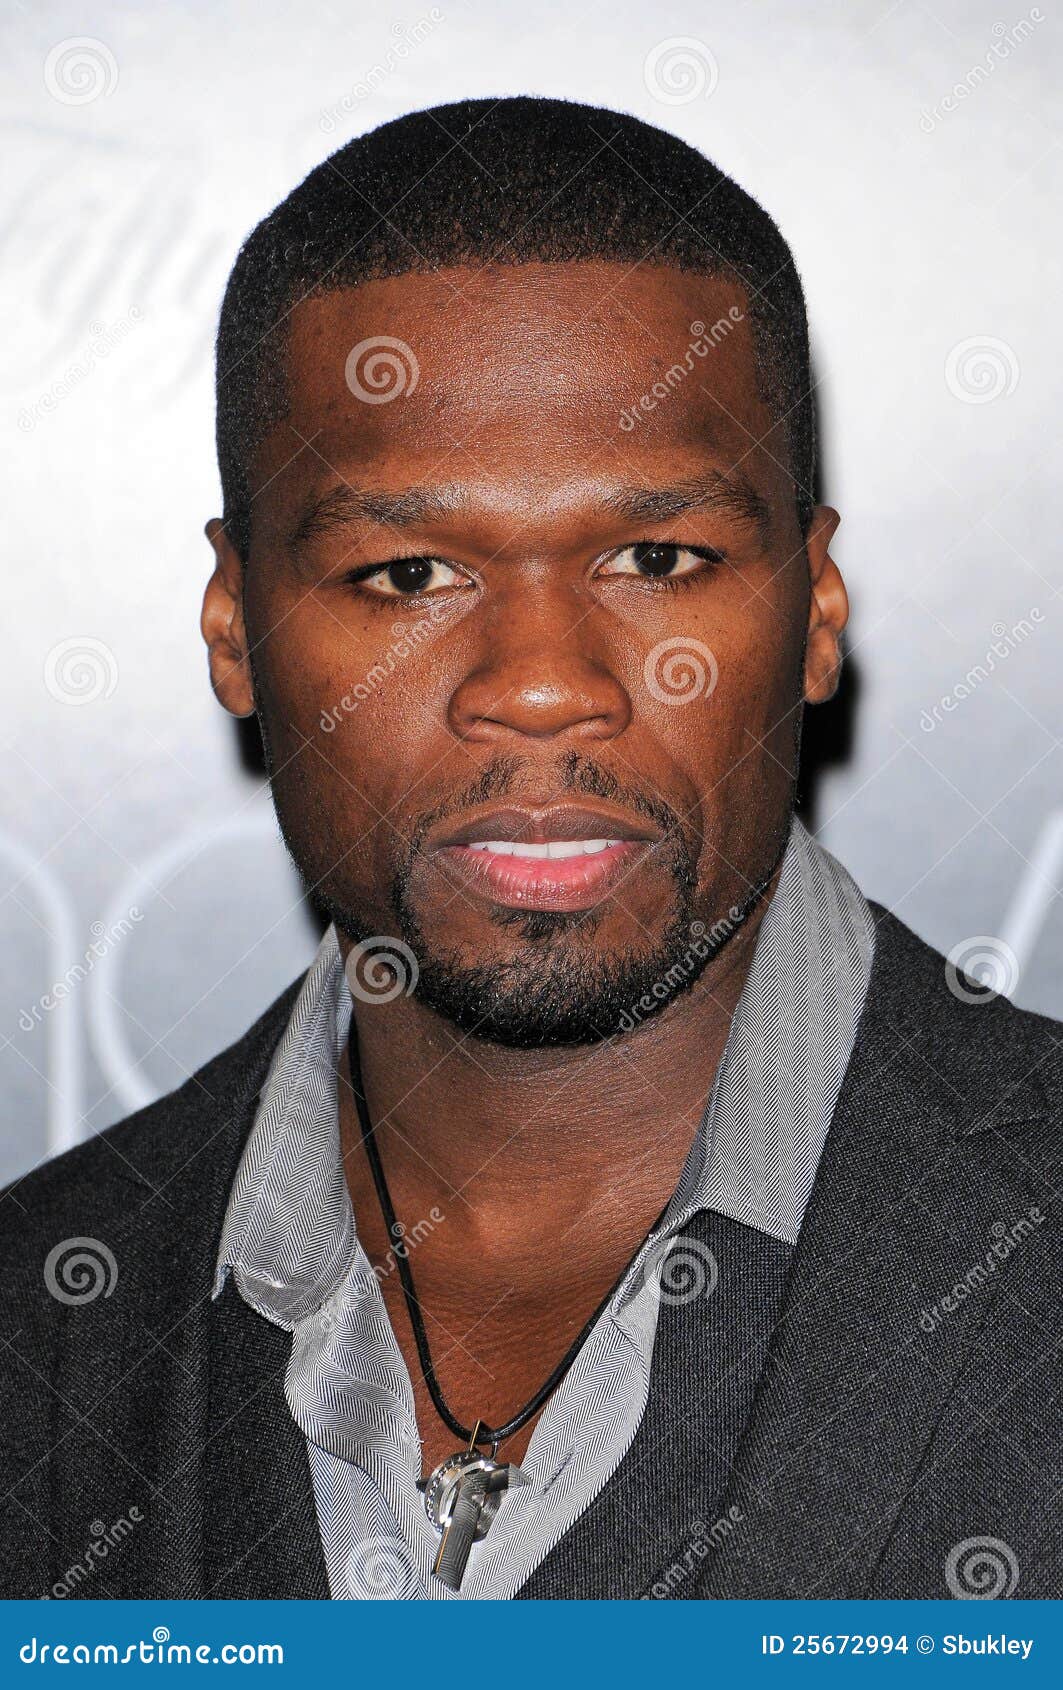 50 Cent editorial stock image. Image of macy, fragrance - 25672994